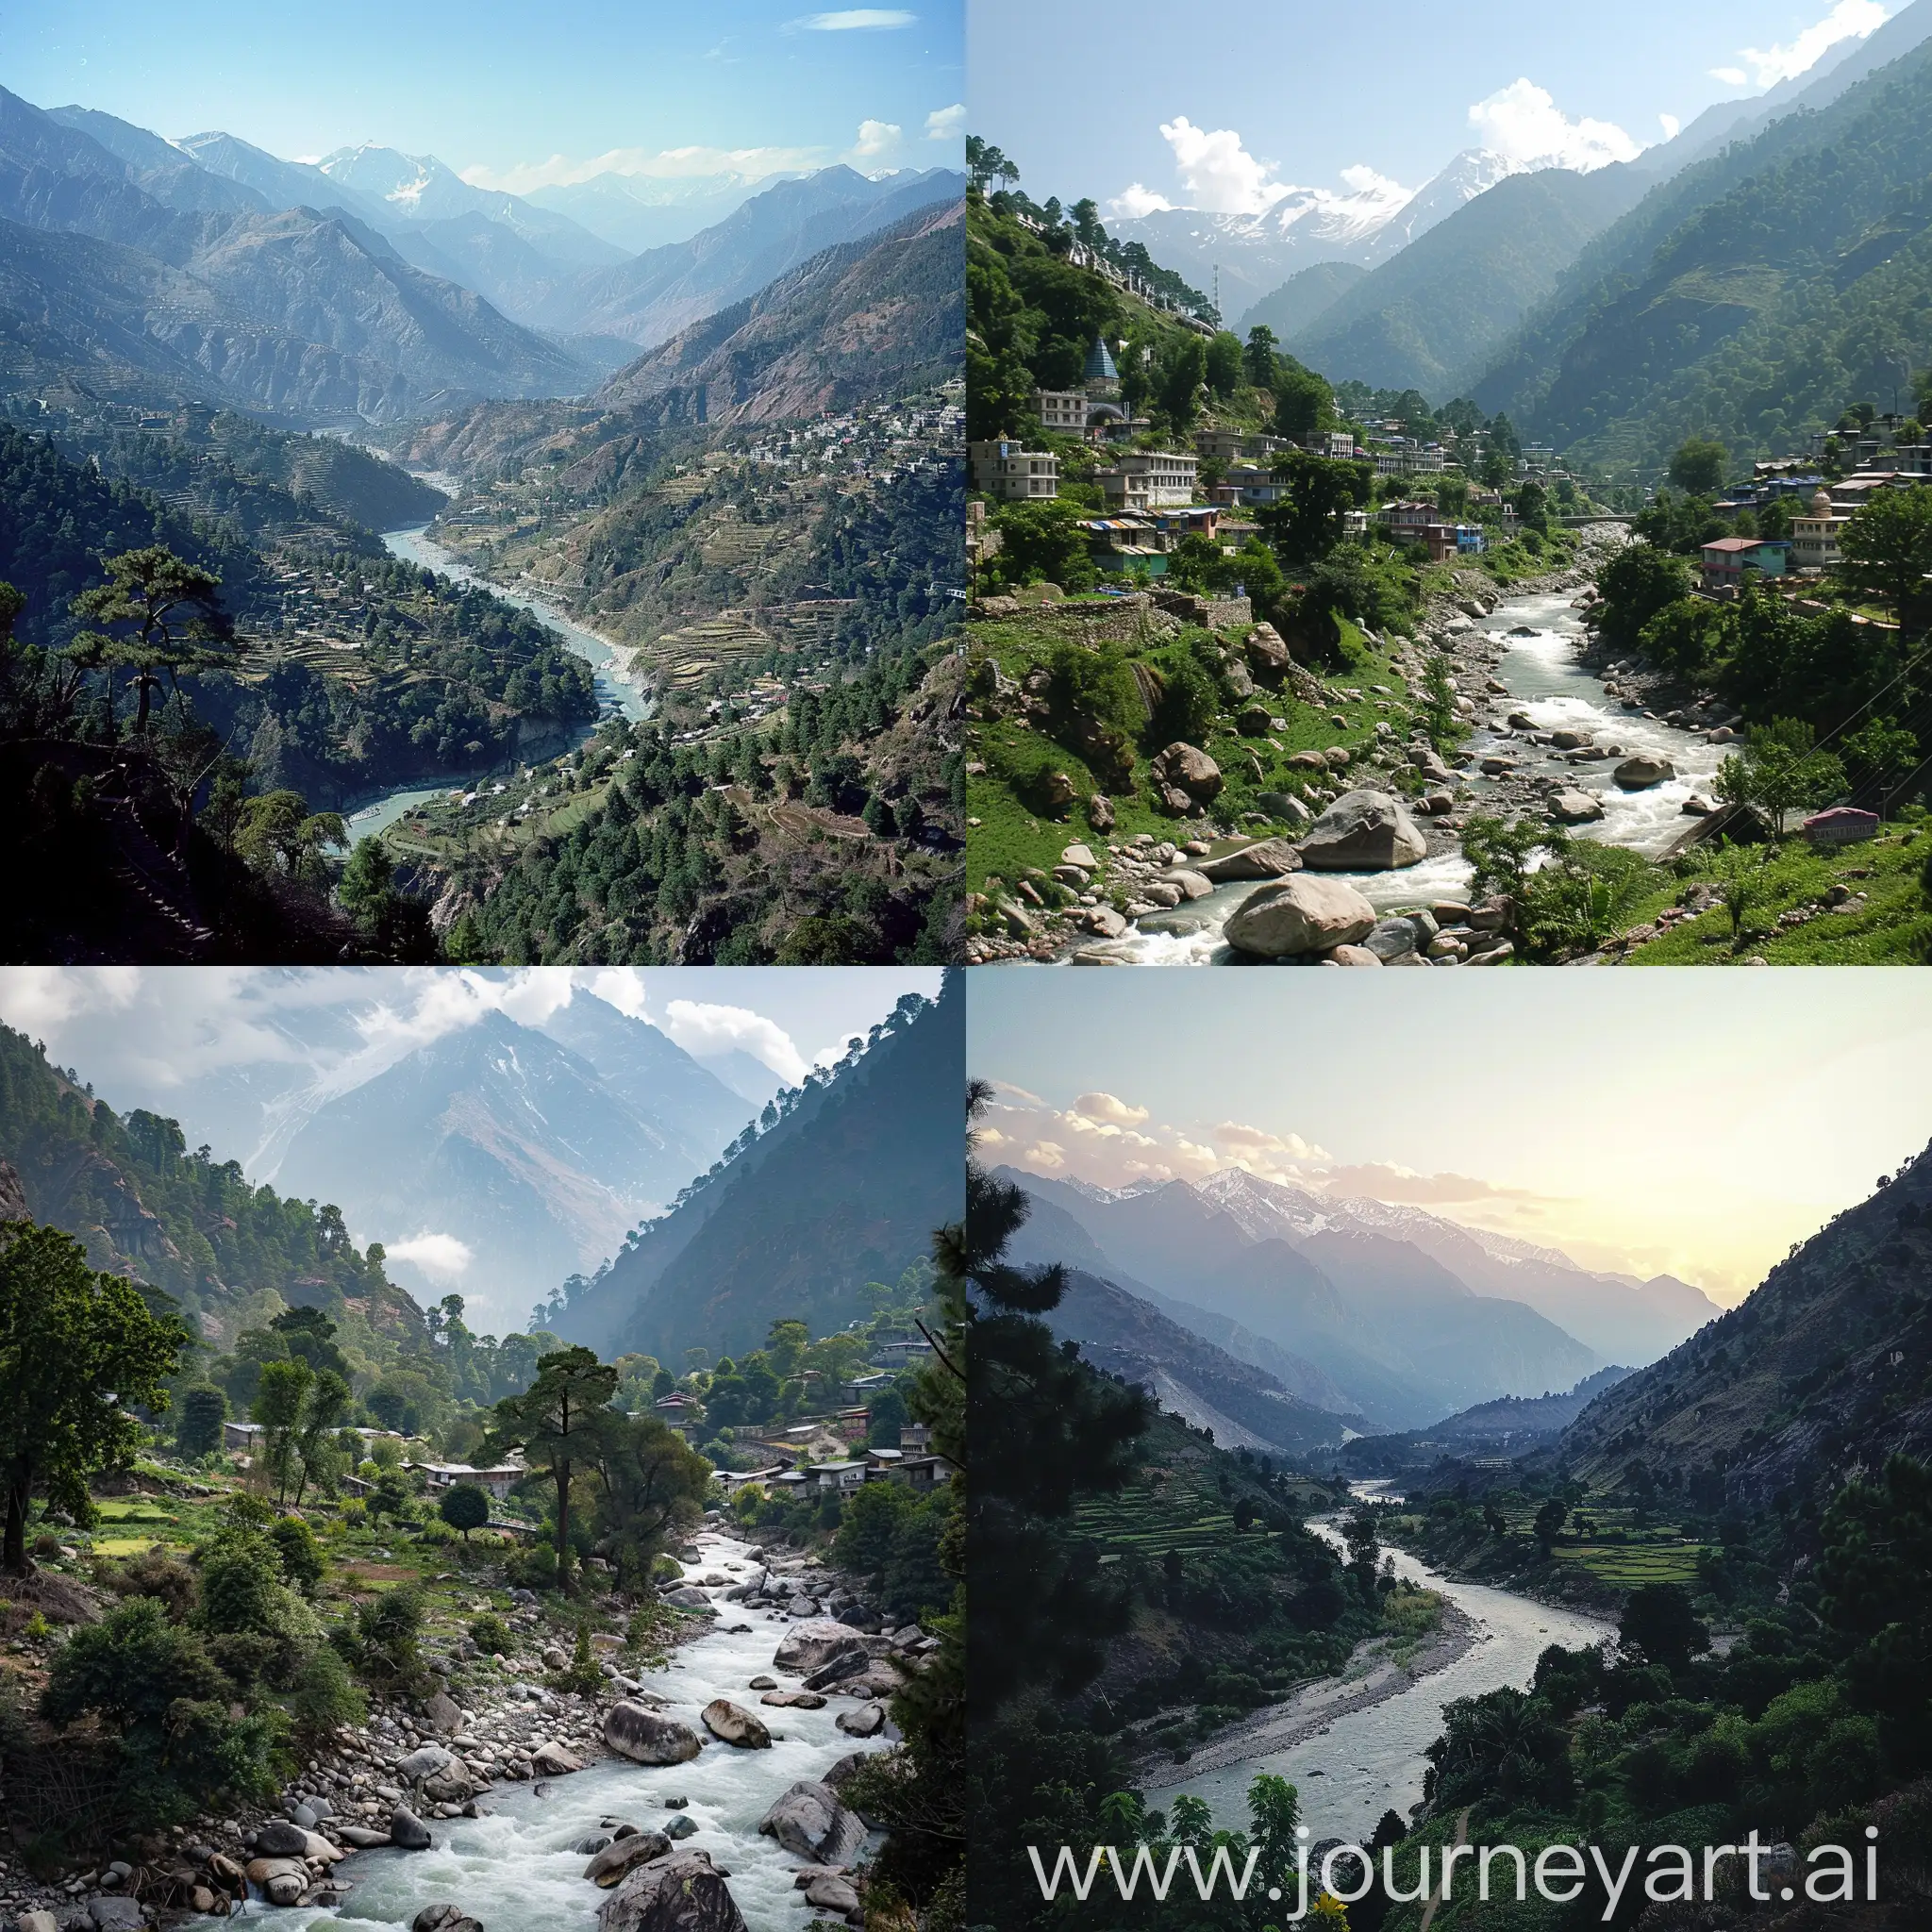 view of Pithoragarh  and their glacier and river story is pahadi people keft their home and muslim community accuried thei land